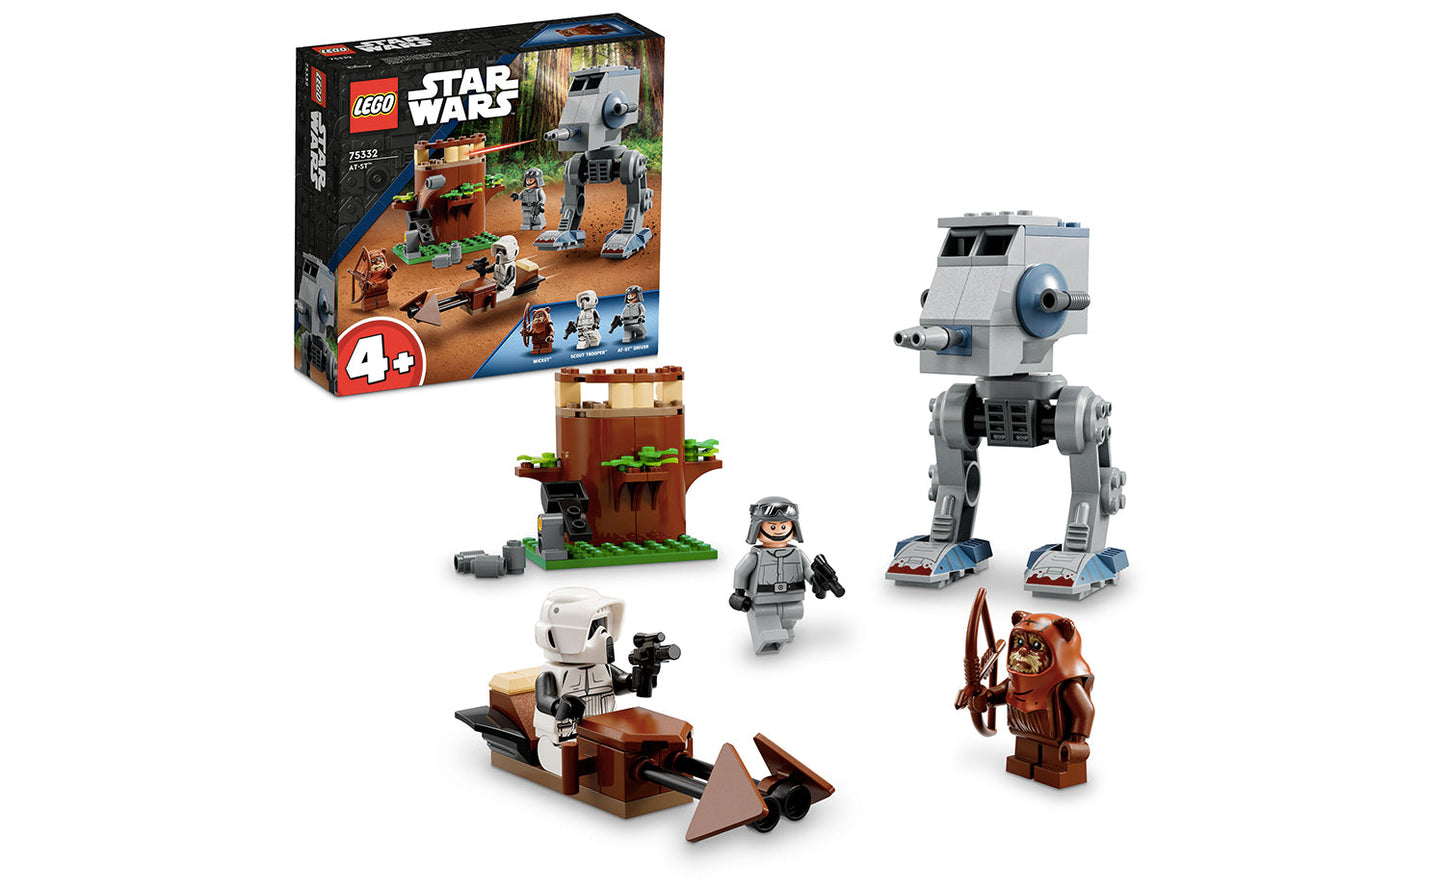 Lego Star Wars AT-ST - 75332